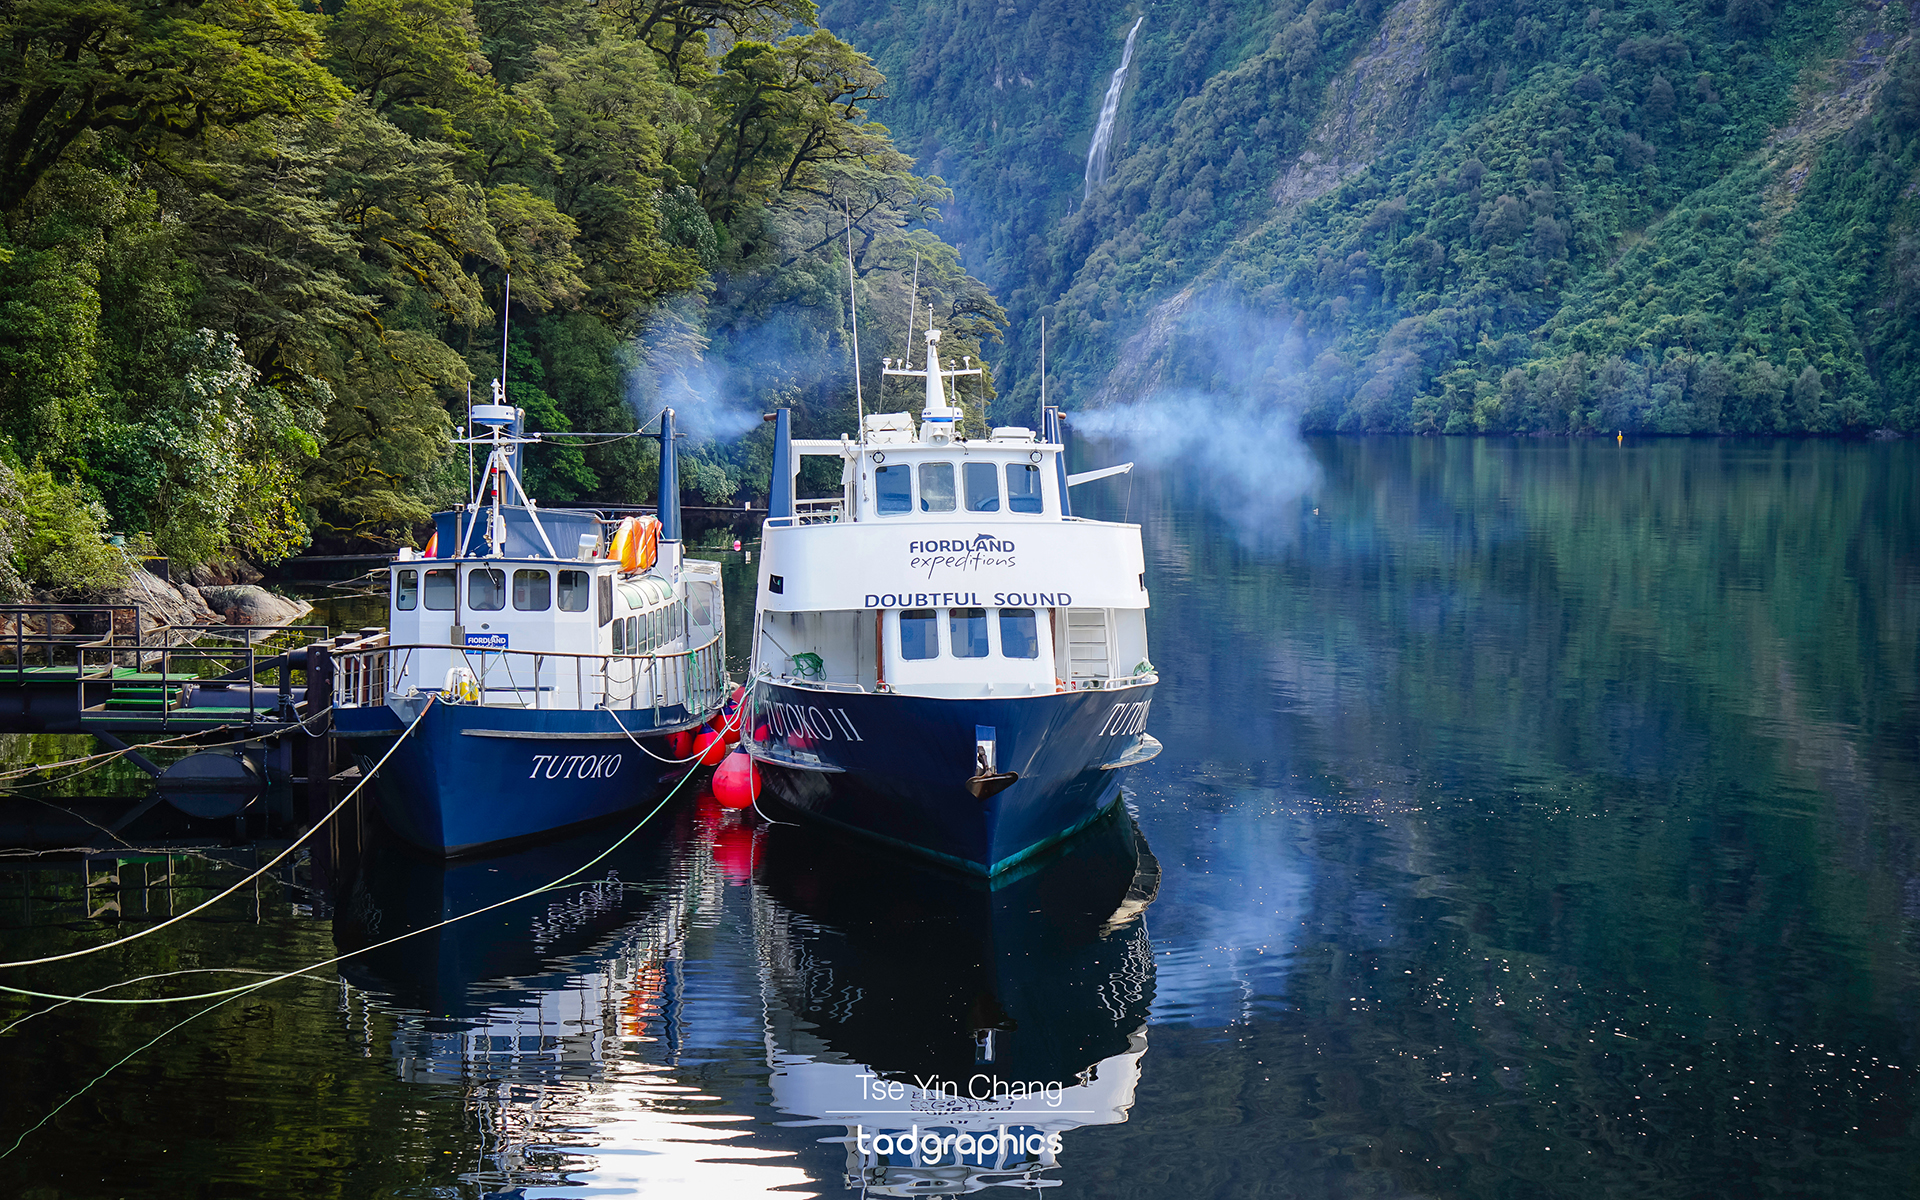 Serenity and silence... as we continued our cruise down Doubtful Sound towards the Tasman Sea